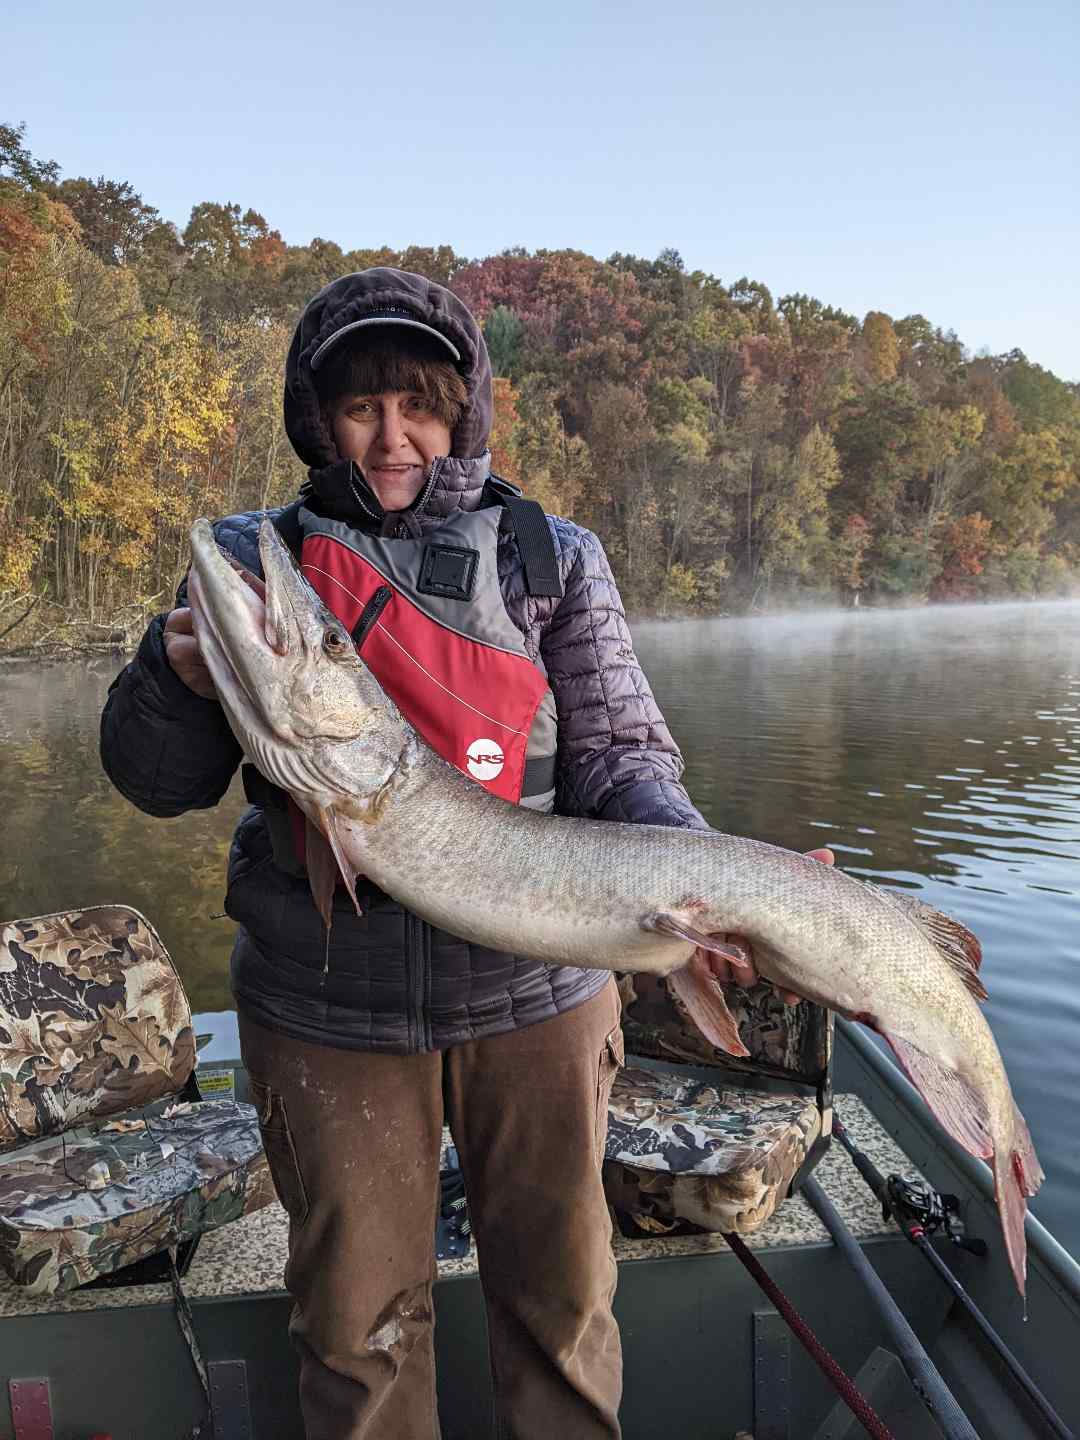 Lost rod, disrespectful fish, bent out hooks. Oh yeah, and a musky